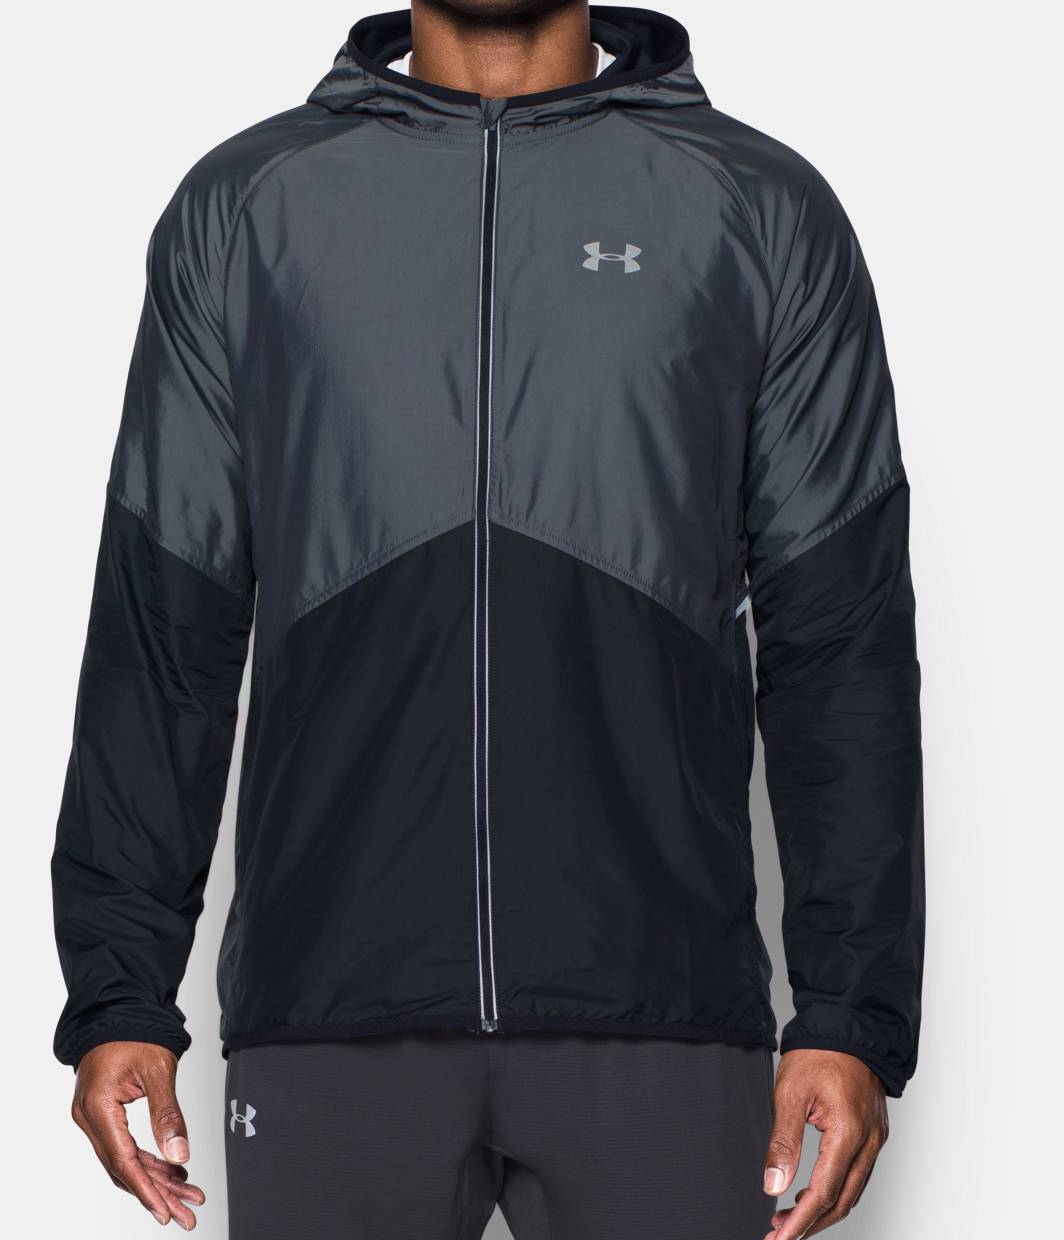 Winter Jackets & Vests | Under Armour US